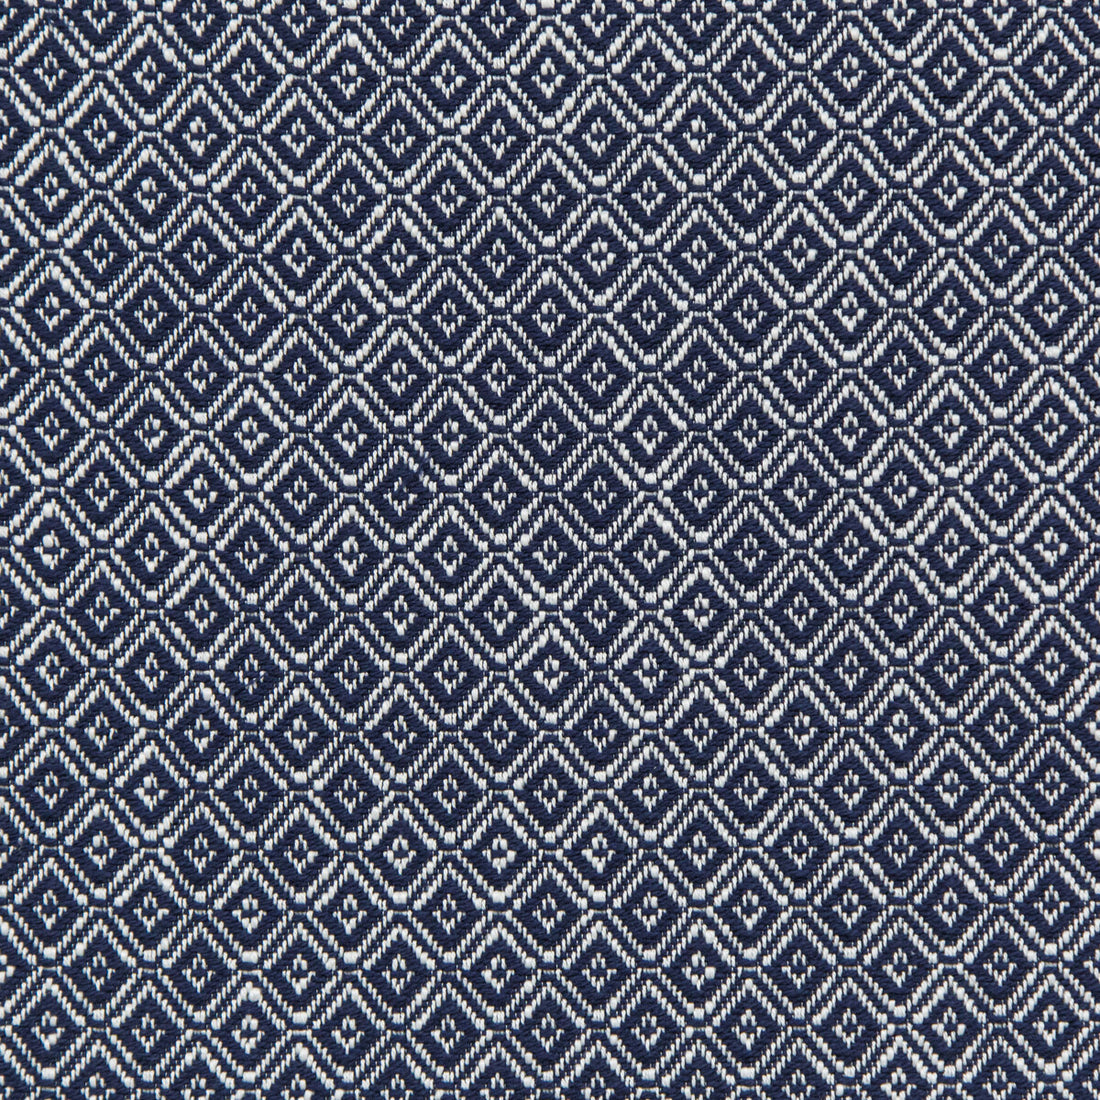 Seaford Weave fabric in navy color - pattern 2020106.50.0 - by Lee Jofa in the Linford Weaves collection